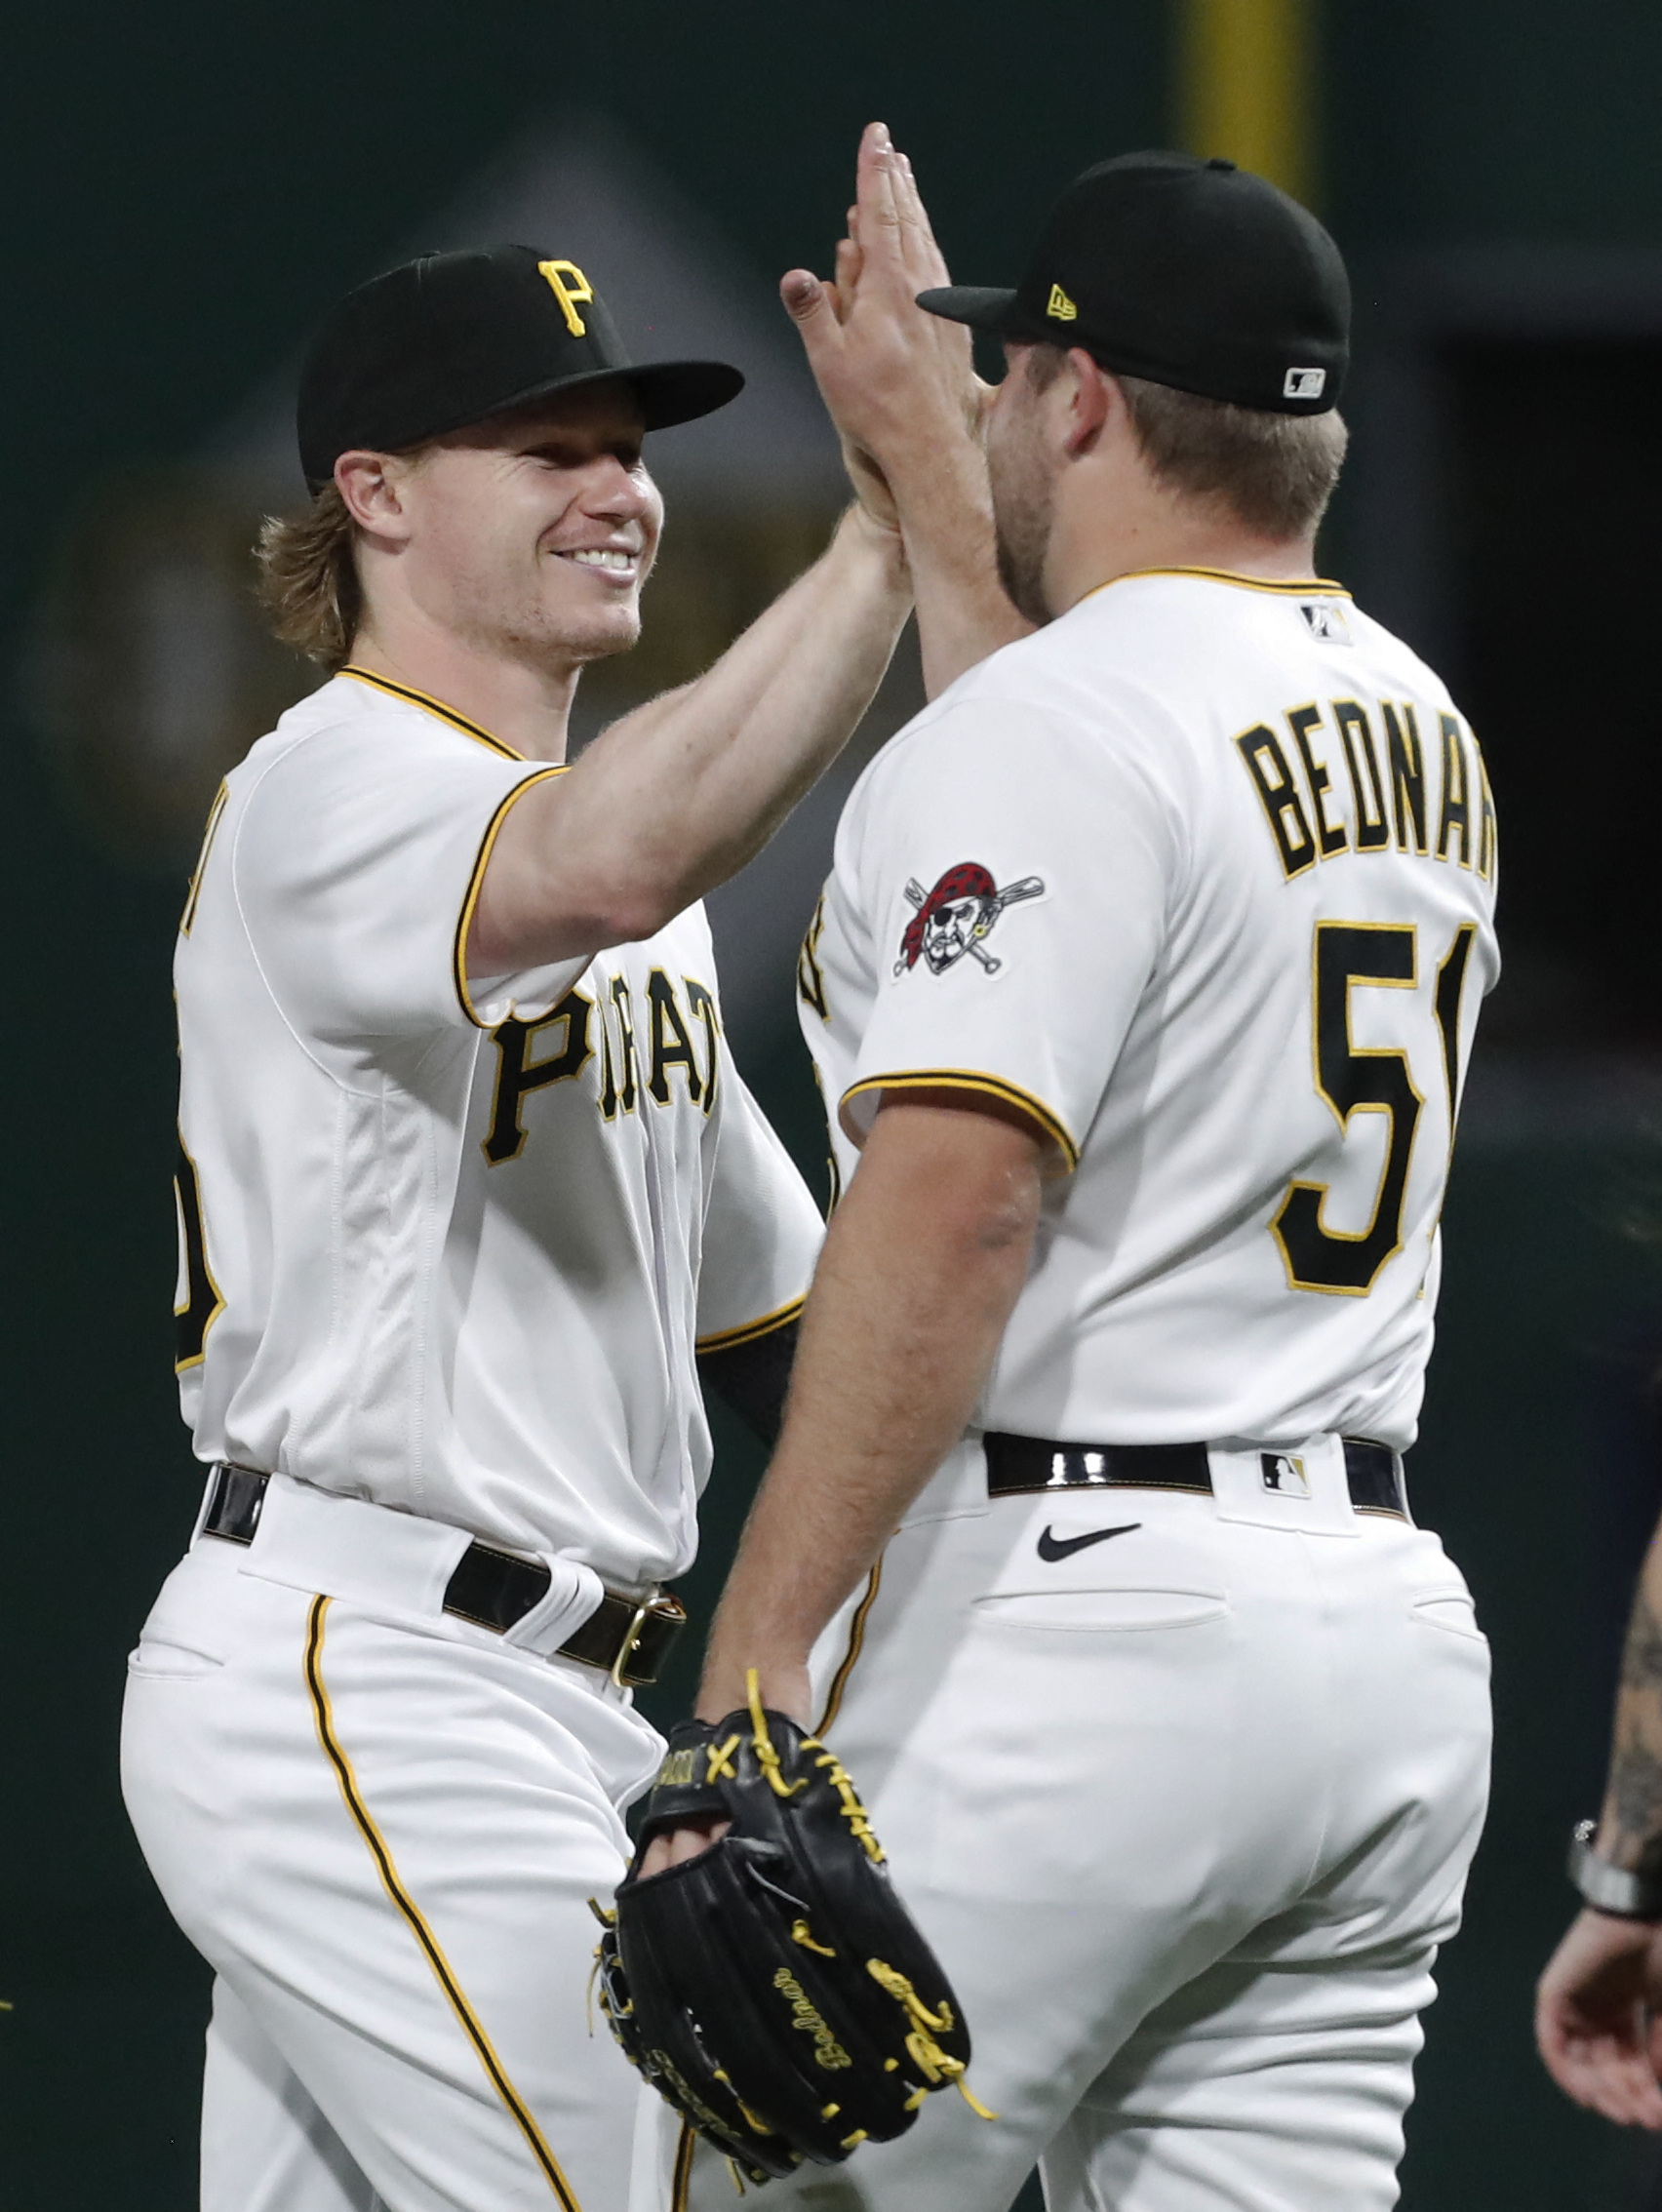 Joe, Suwinski hit back-to-back HRs in Pirates' win over Reds